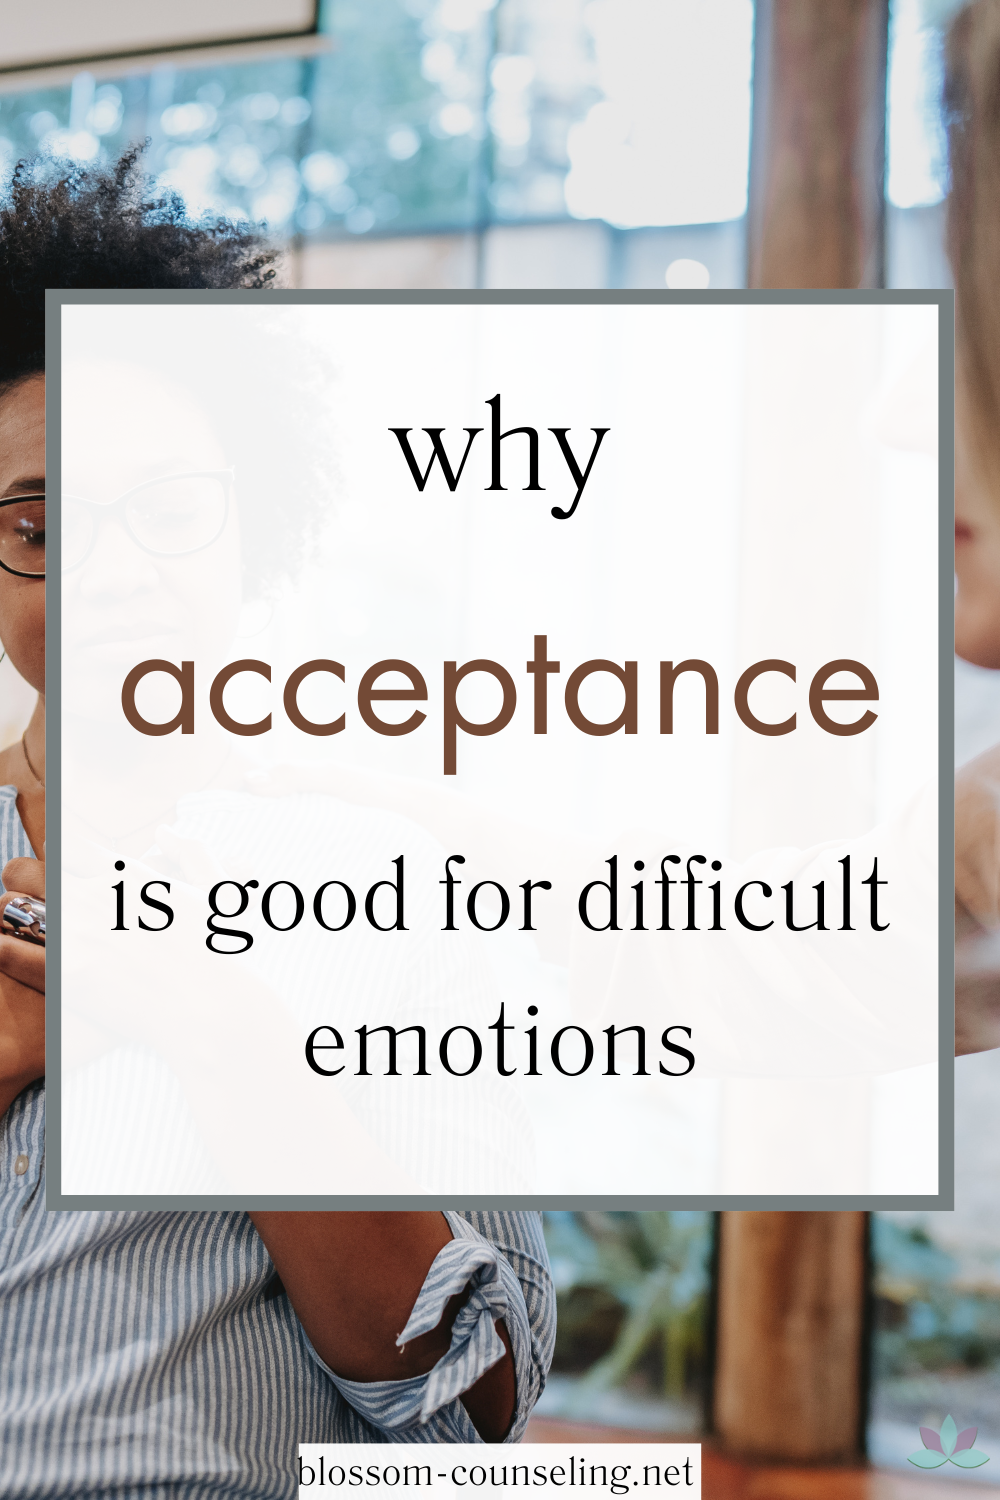 Why Acceptance is Good for Difficult Emotions